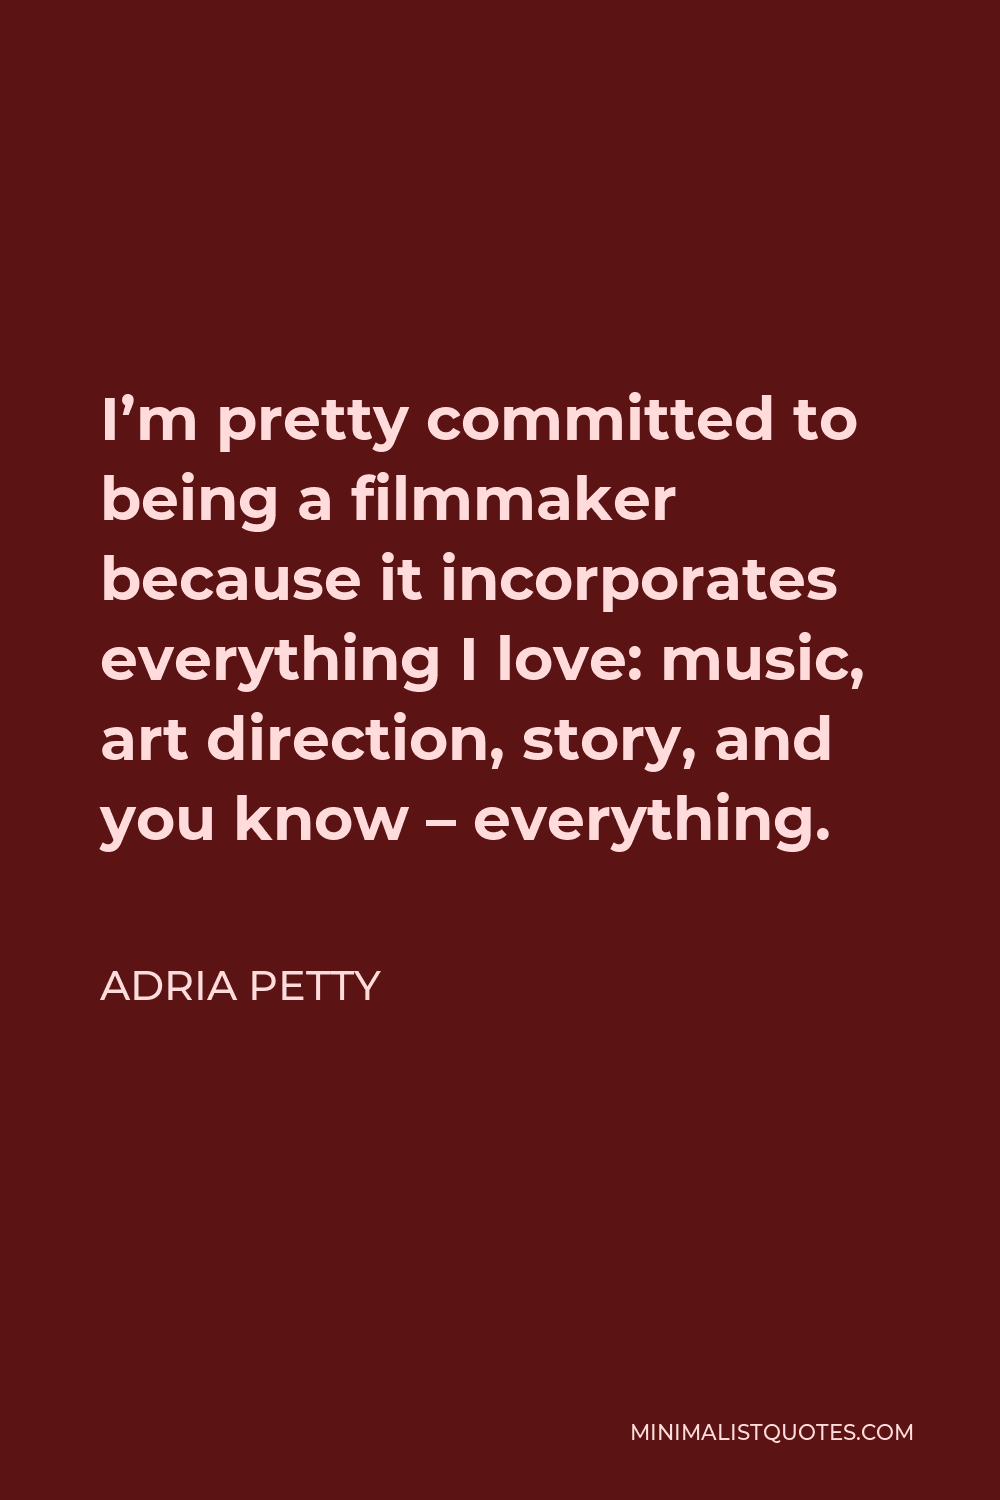 Adria Petty Quote - I’m pretty committed to being a filmmaker because it incorporates everything I love: music, art direction, story, and you know – everything.